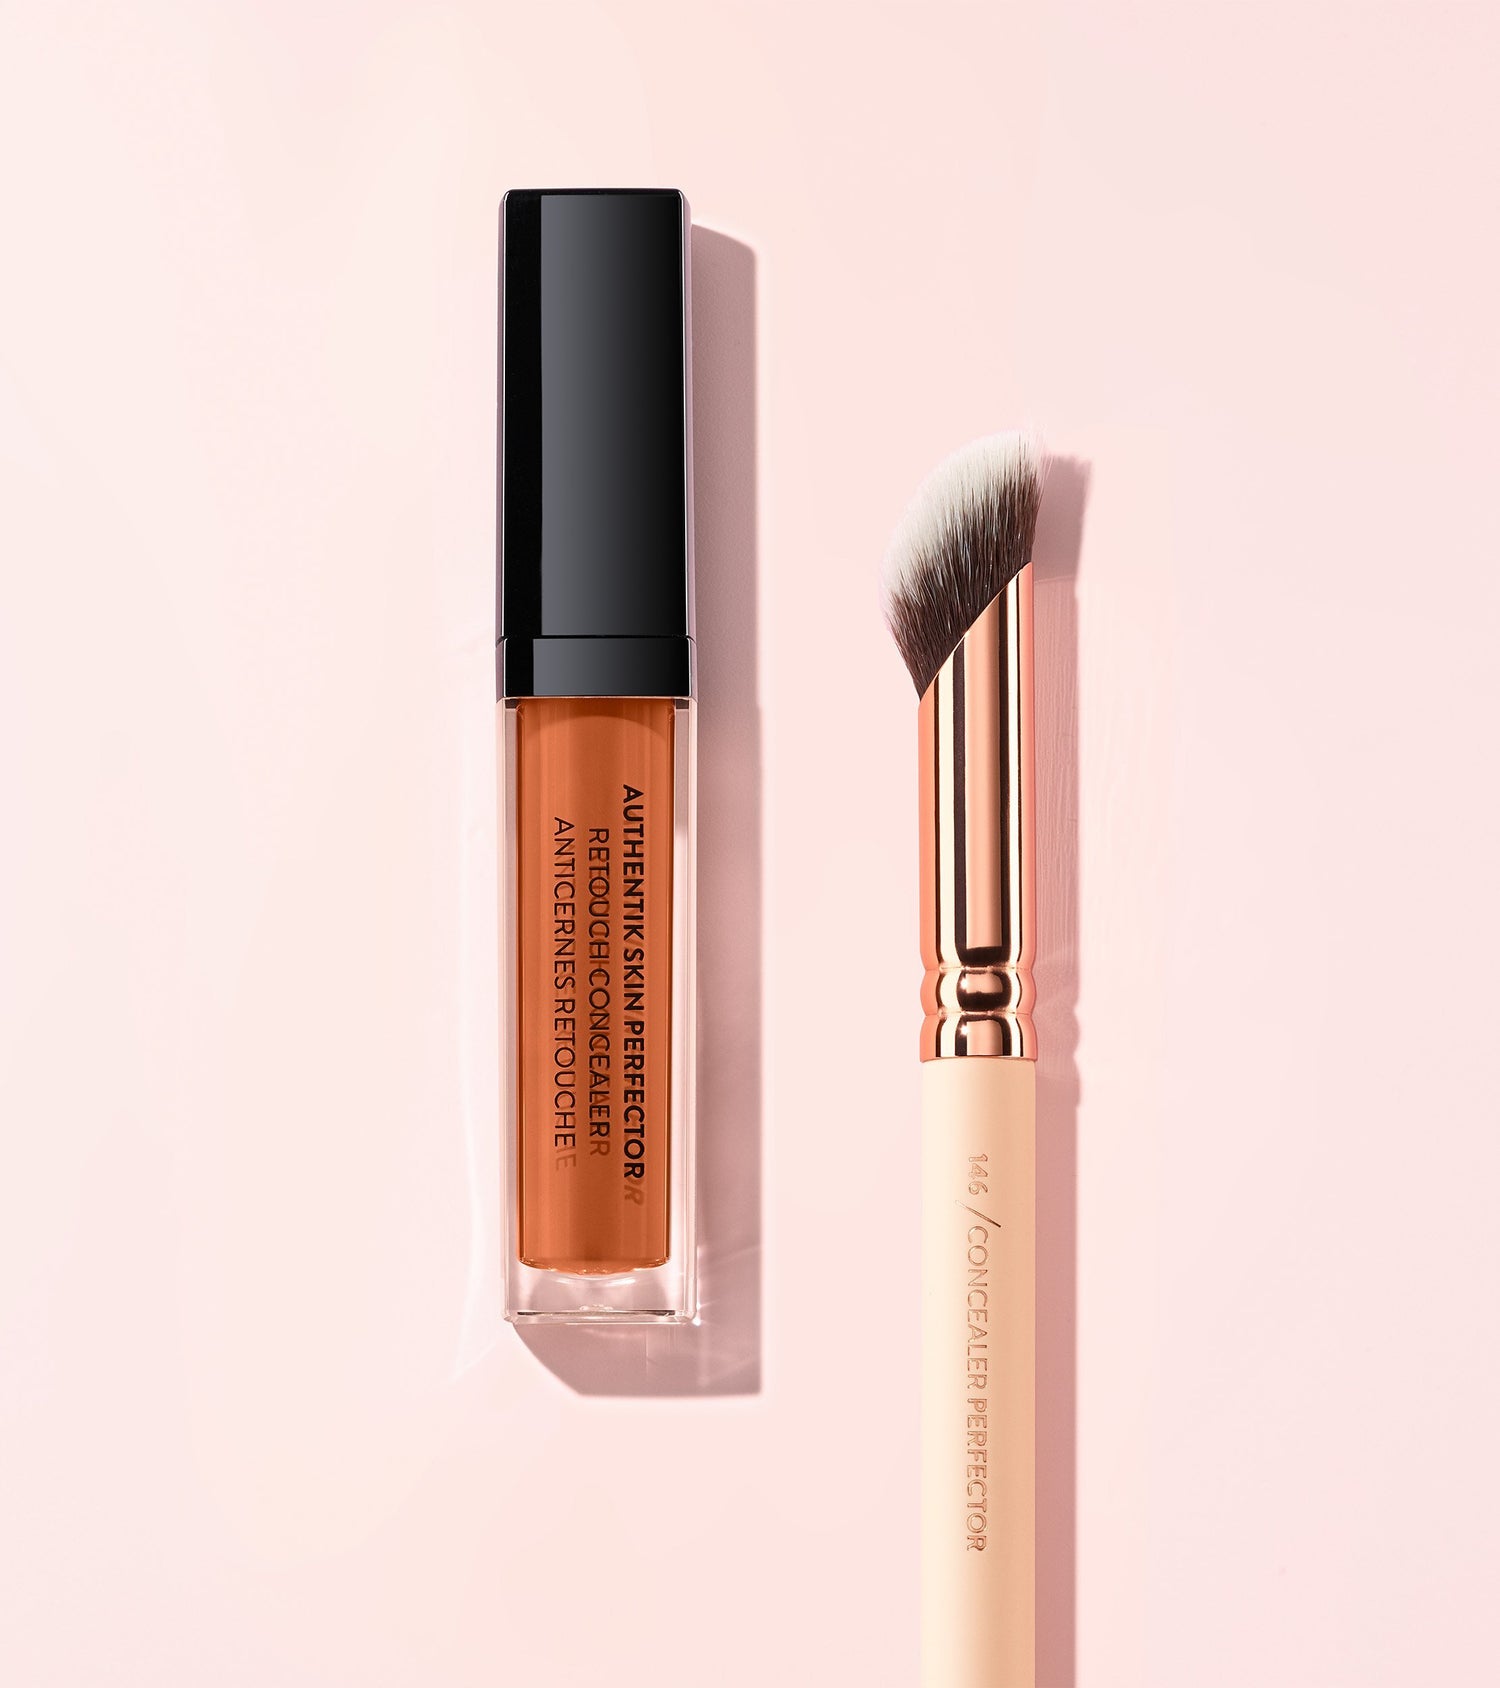 AUTHENTIK SKIN PERFECTOR CONCEALER (300 VALID) Main Image featured